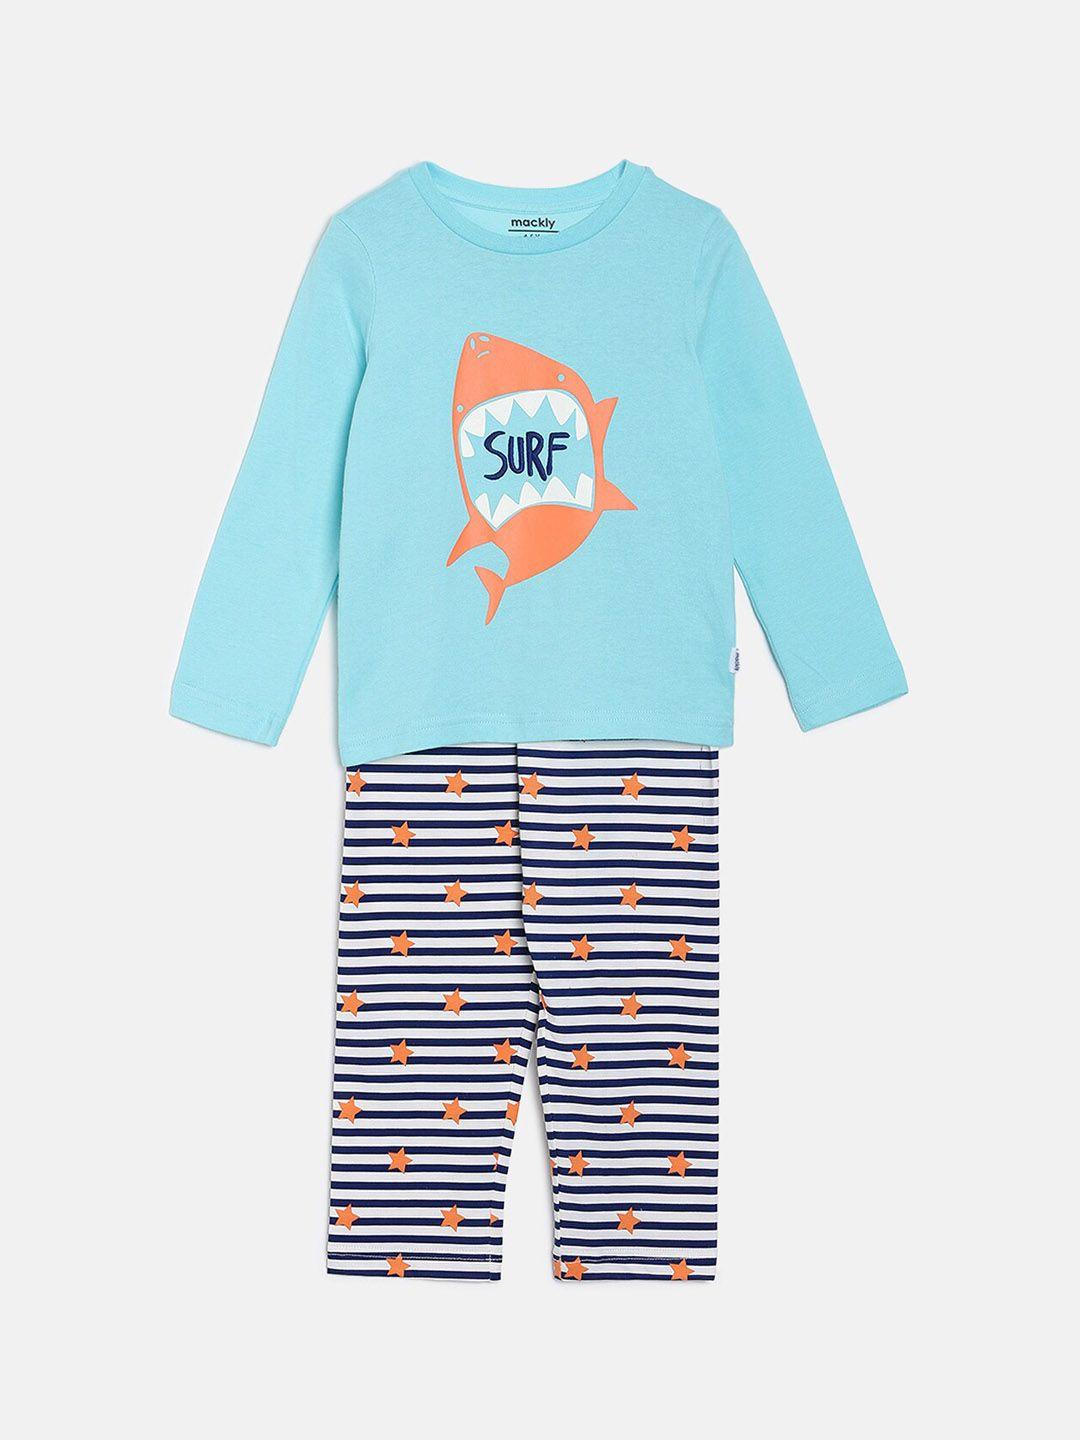 mackly boys printed long sleeves pure cotton night suit